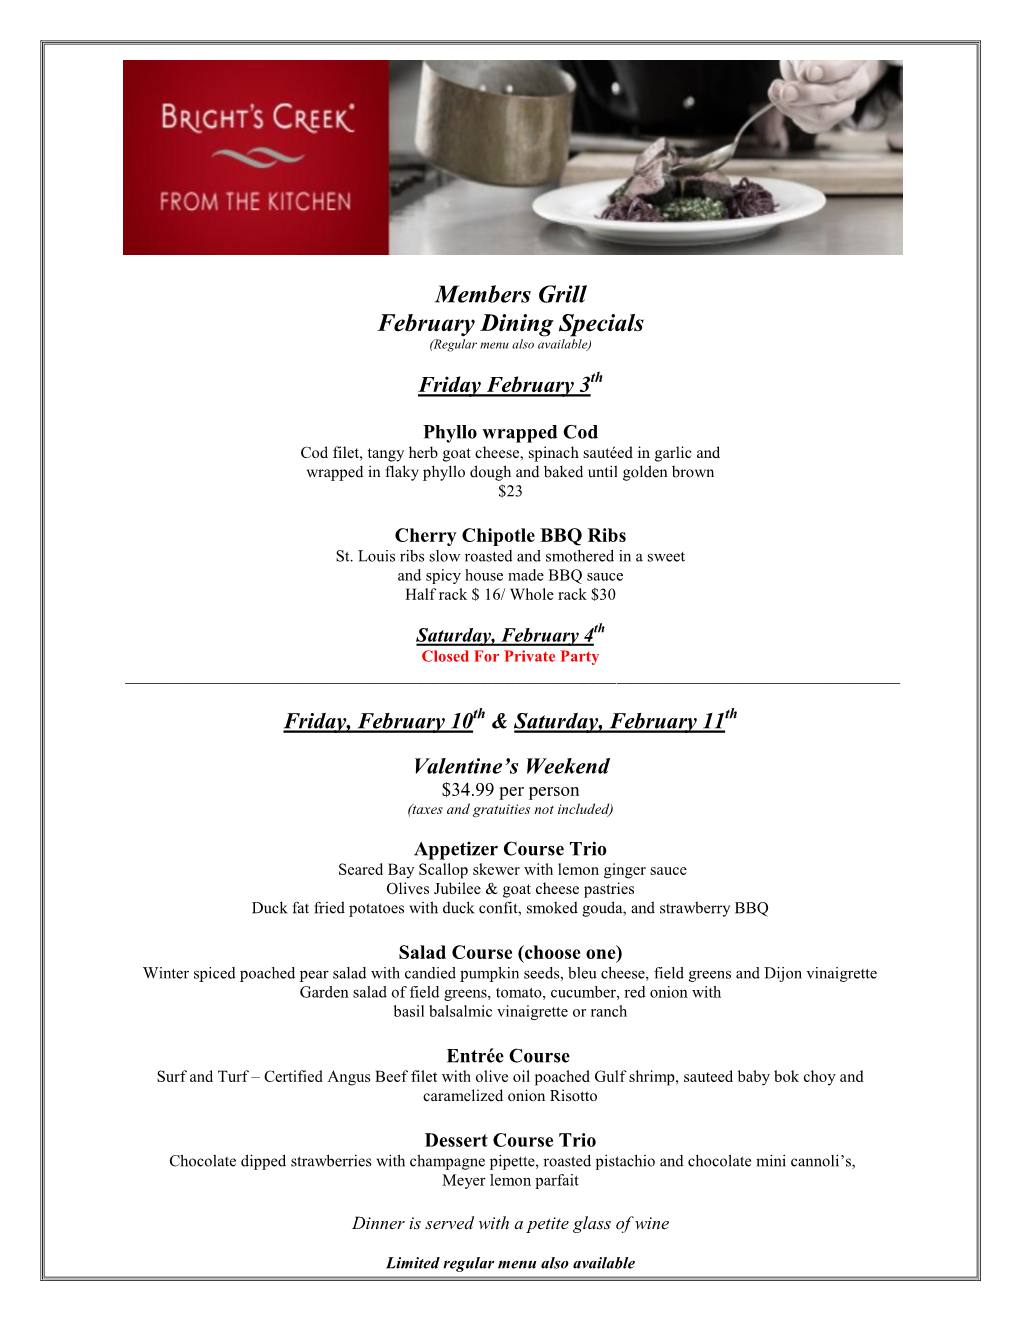 Members Grill February Dining Specials (Regular Menu Also Available)